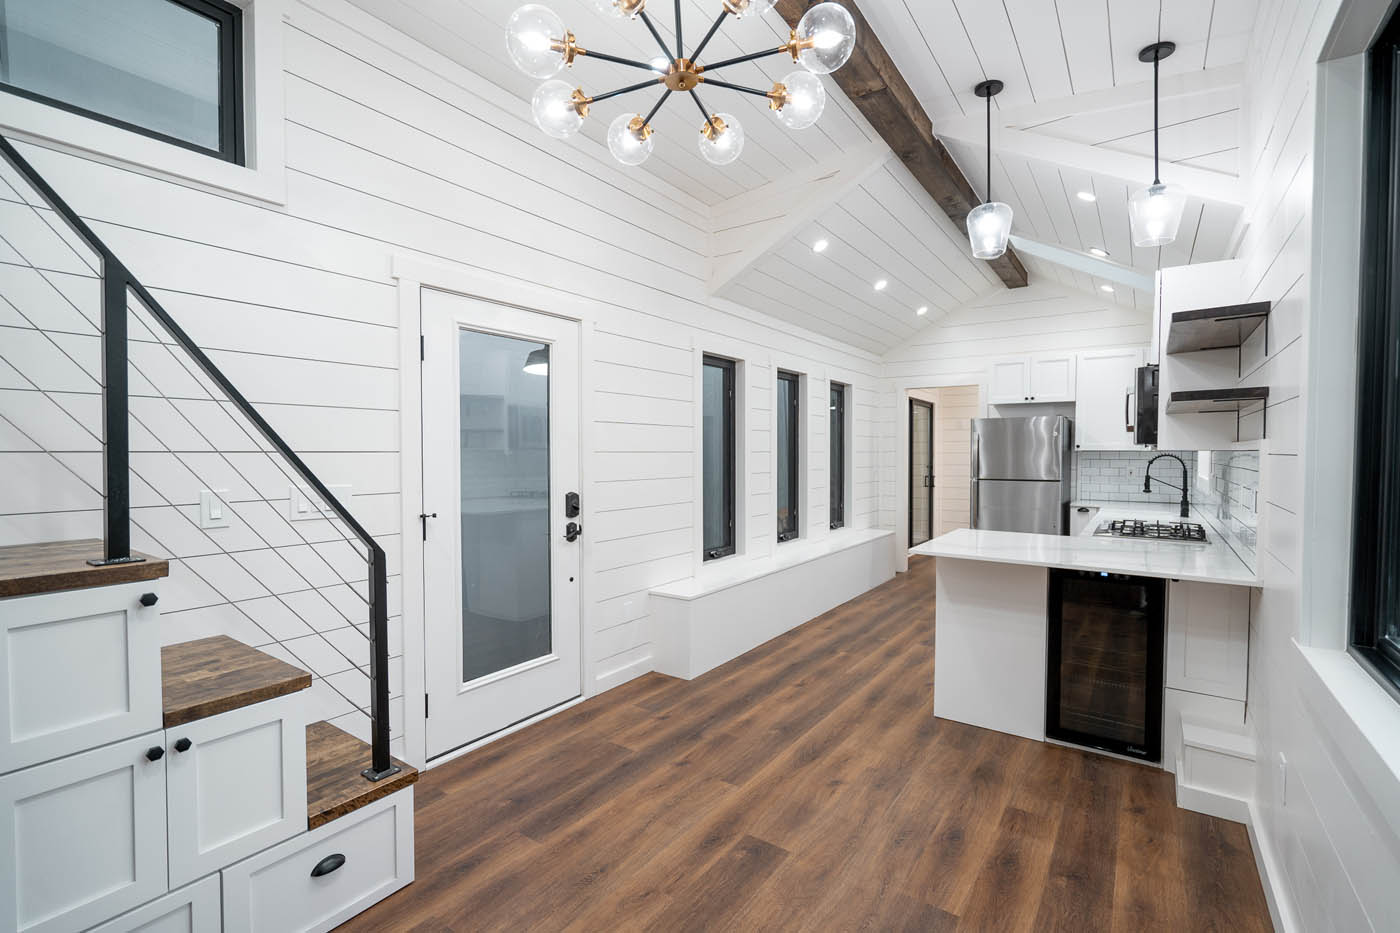 A modern home with dark floors and white kitchen cabinets, provided by one of the best Richmond tiny house companies.